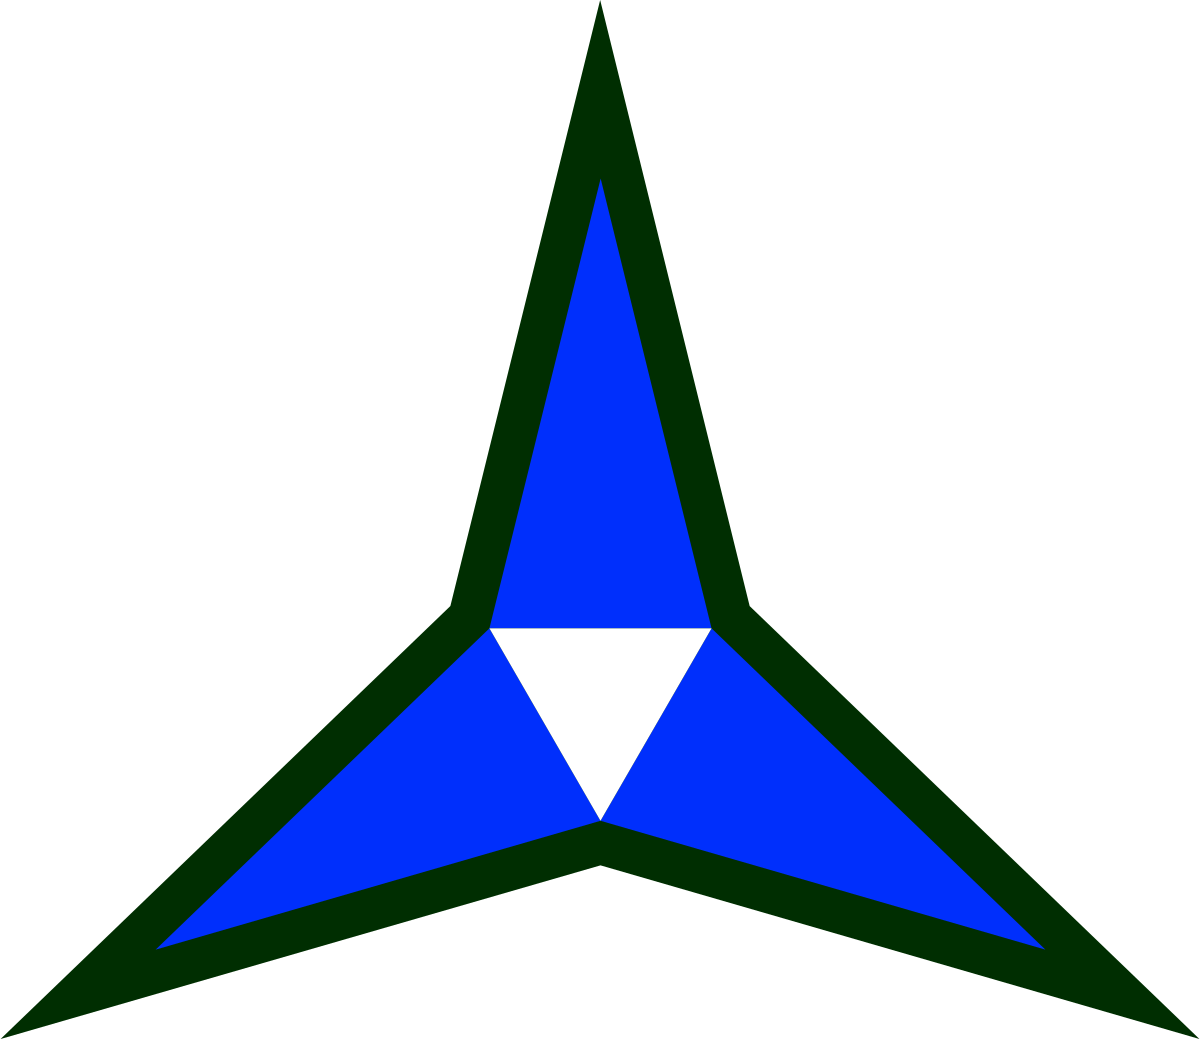 Insignia of the 3rd Armored Corps